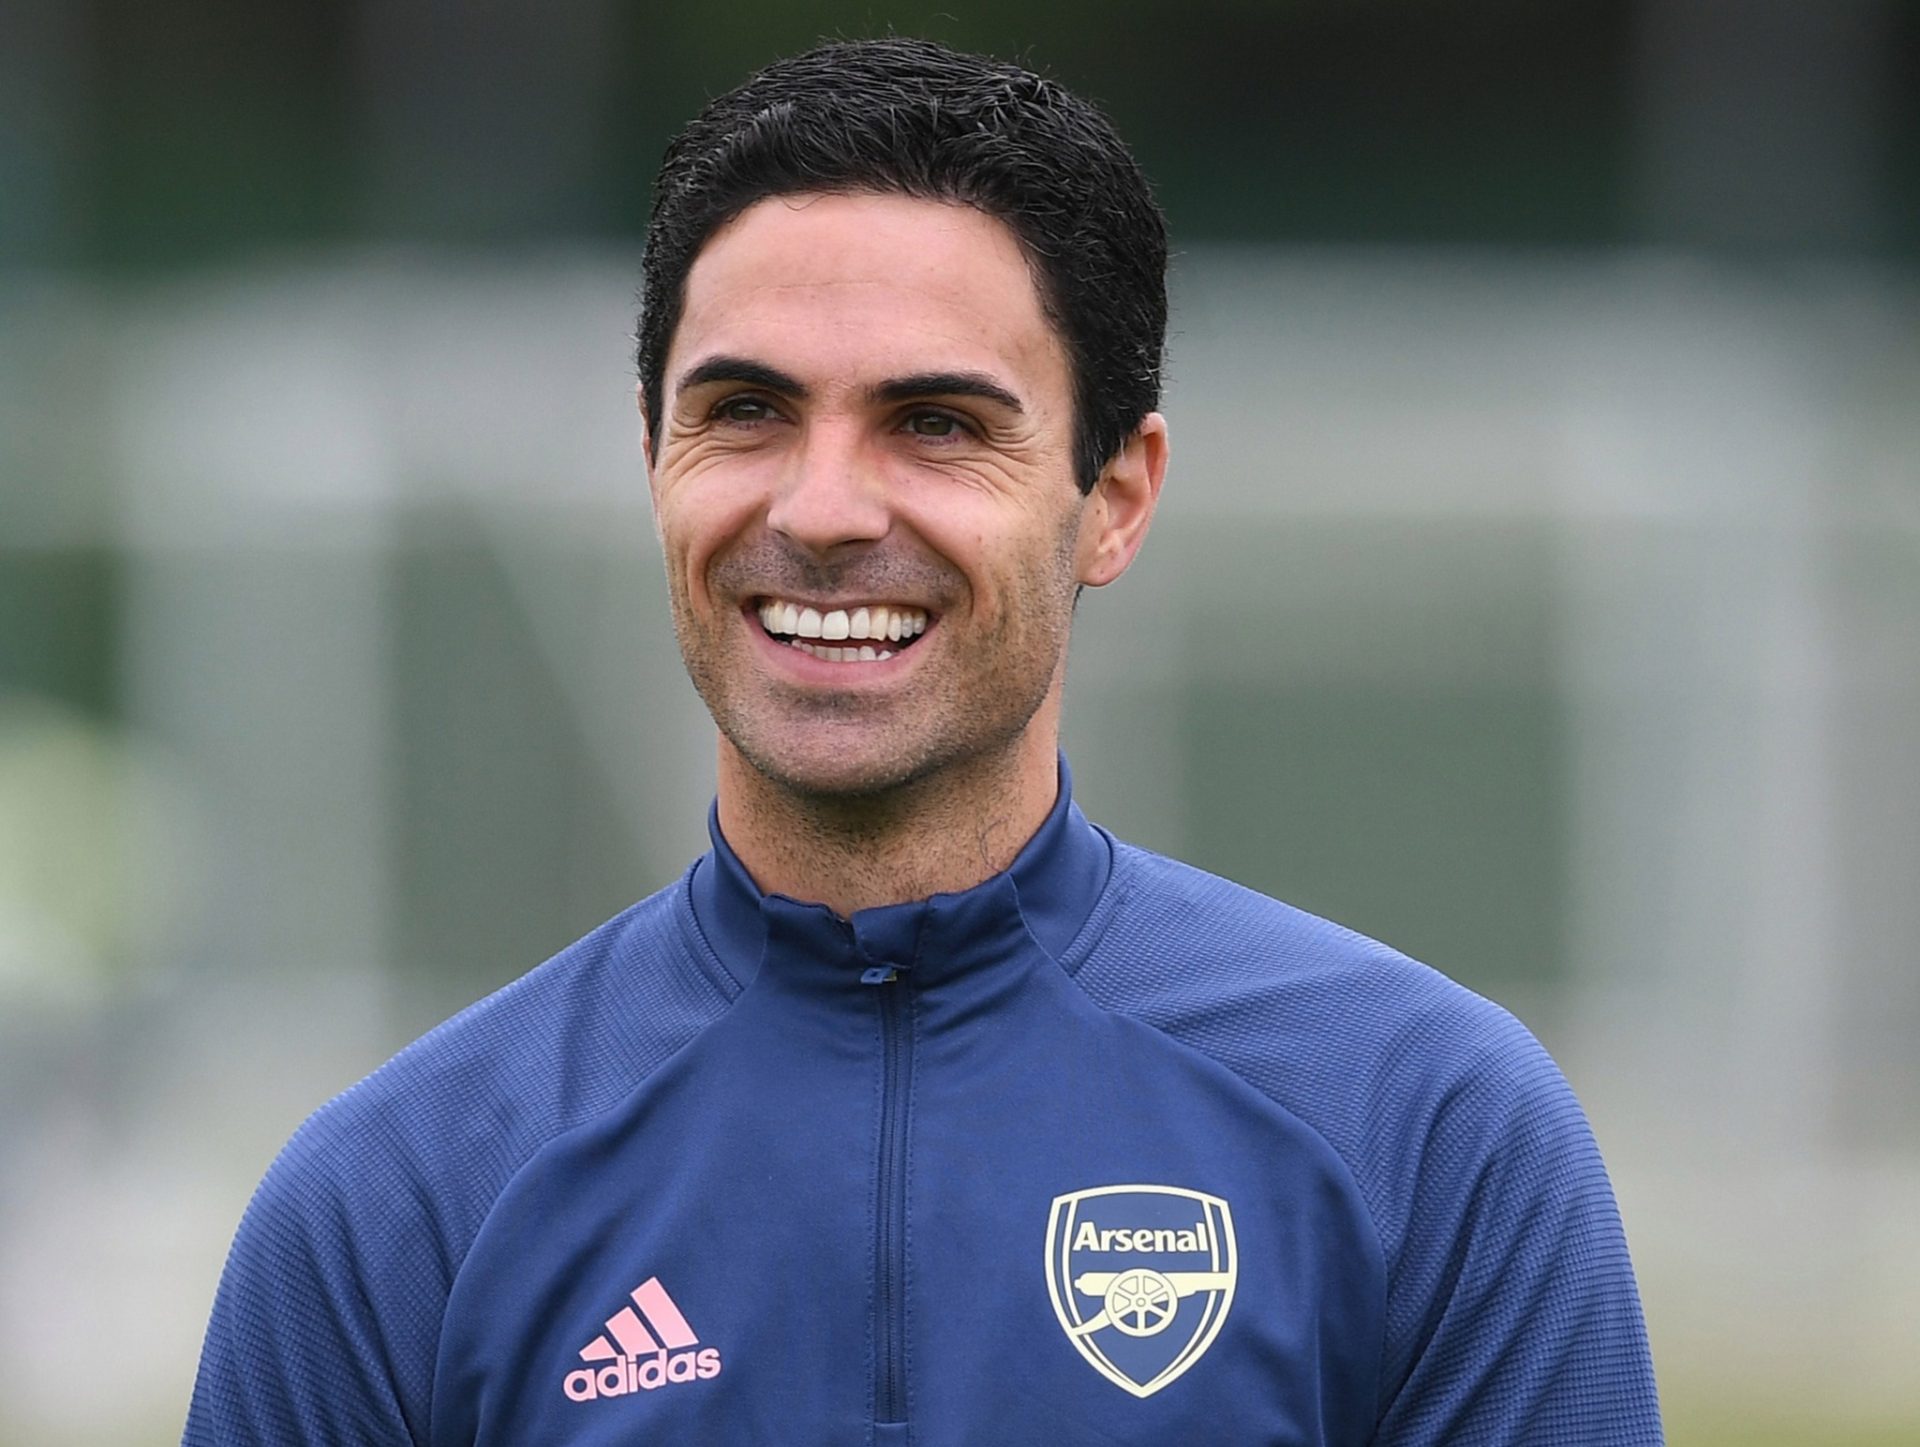 Arteta’s ego massaged with the win over City